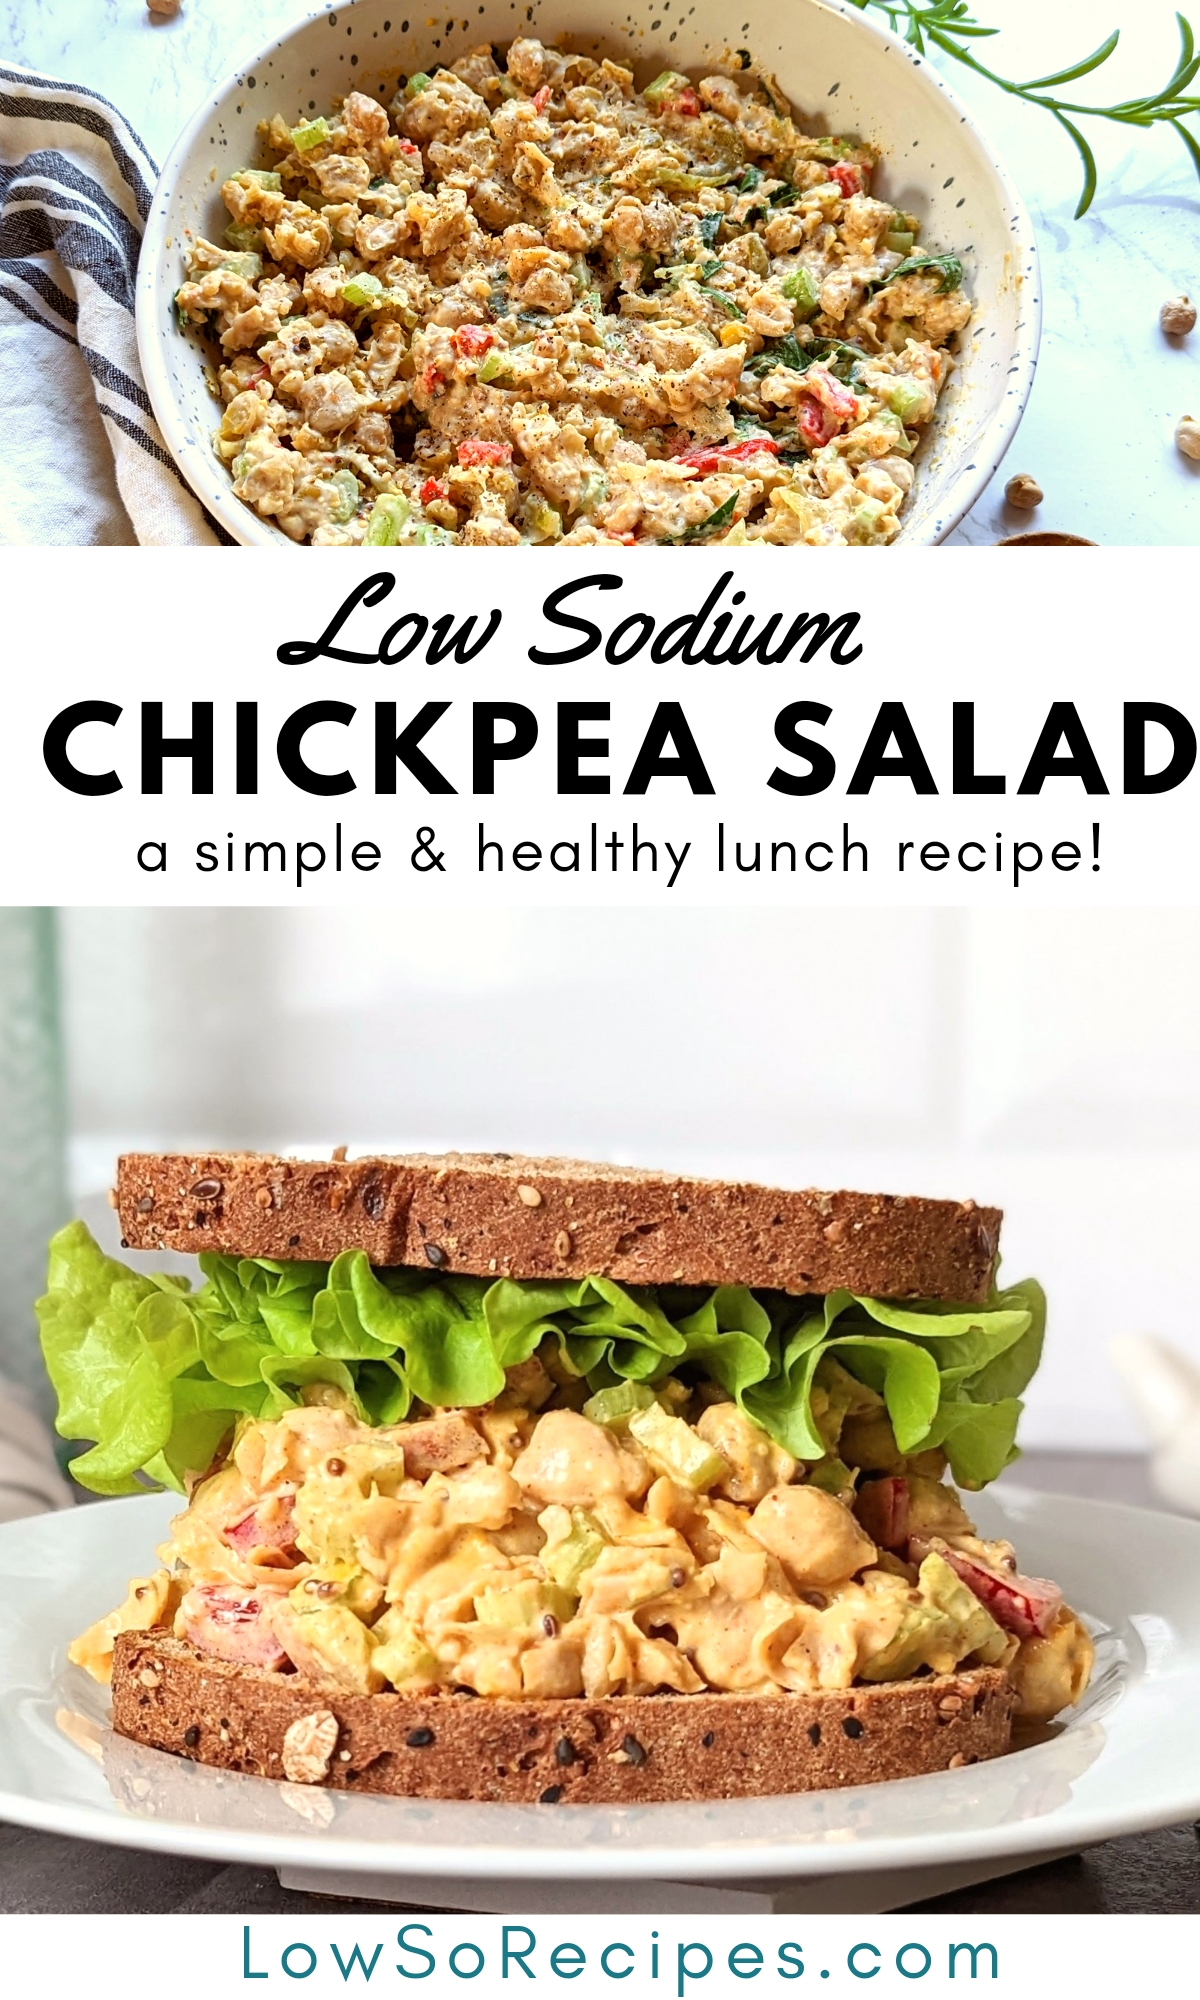 low sodium chickpea salad recipe healthy low salt vegetarian recipes for lunch or dinner no meat